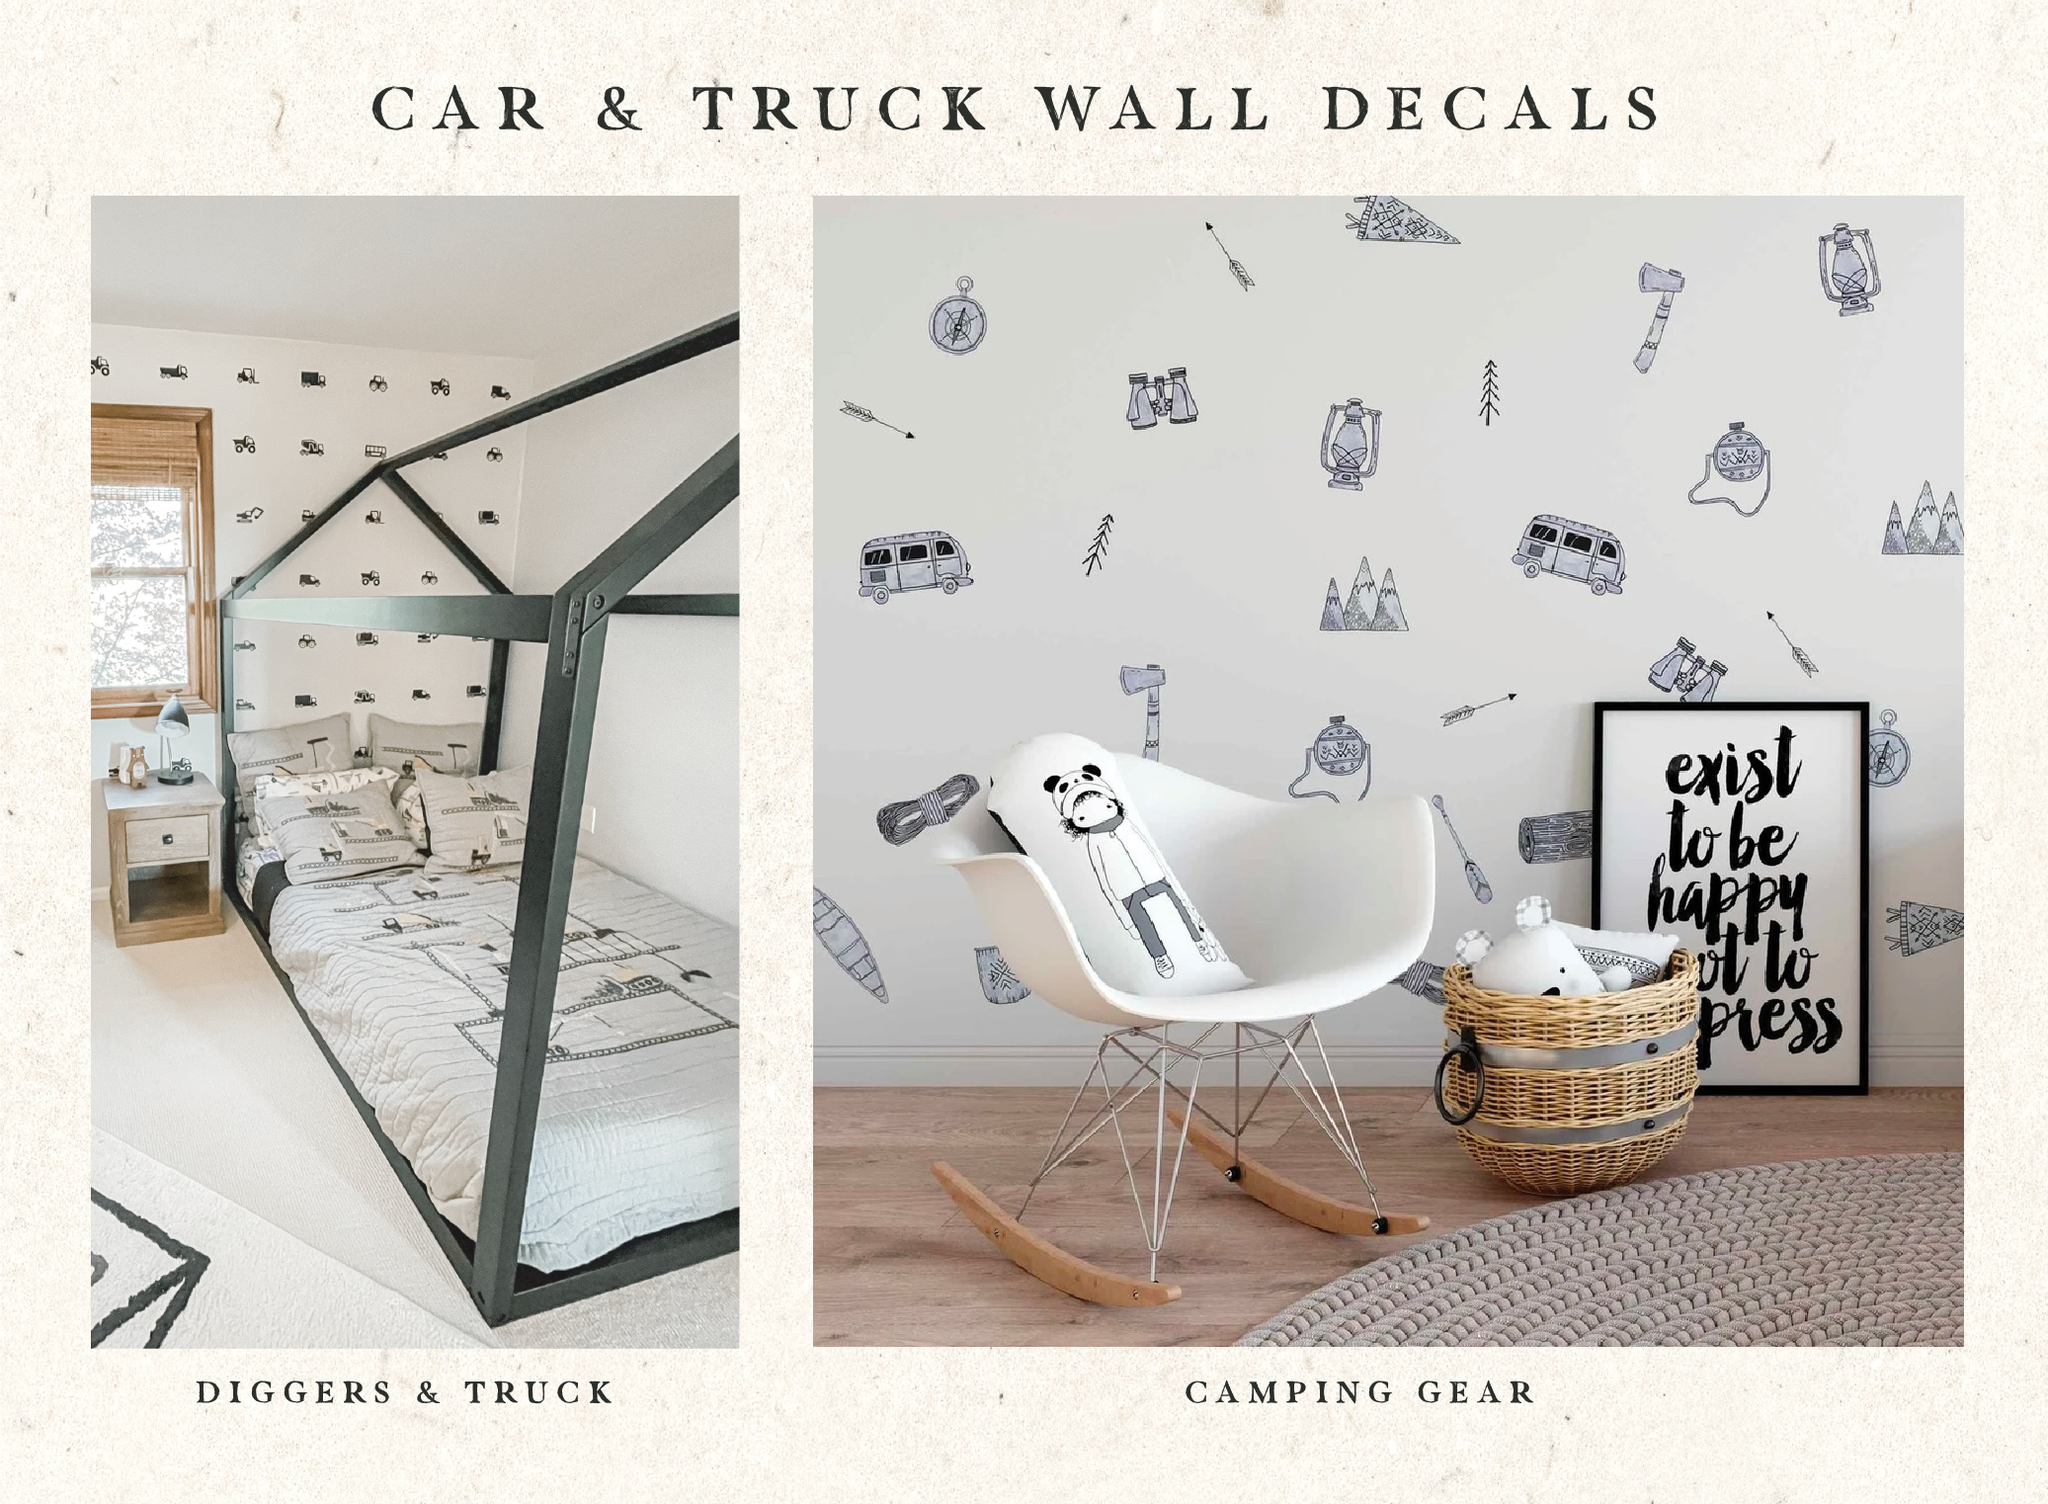 Car and truck wall decals